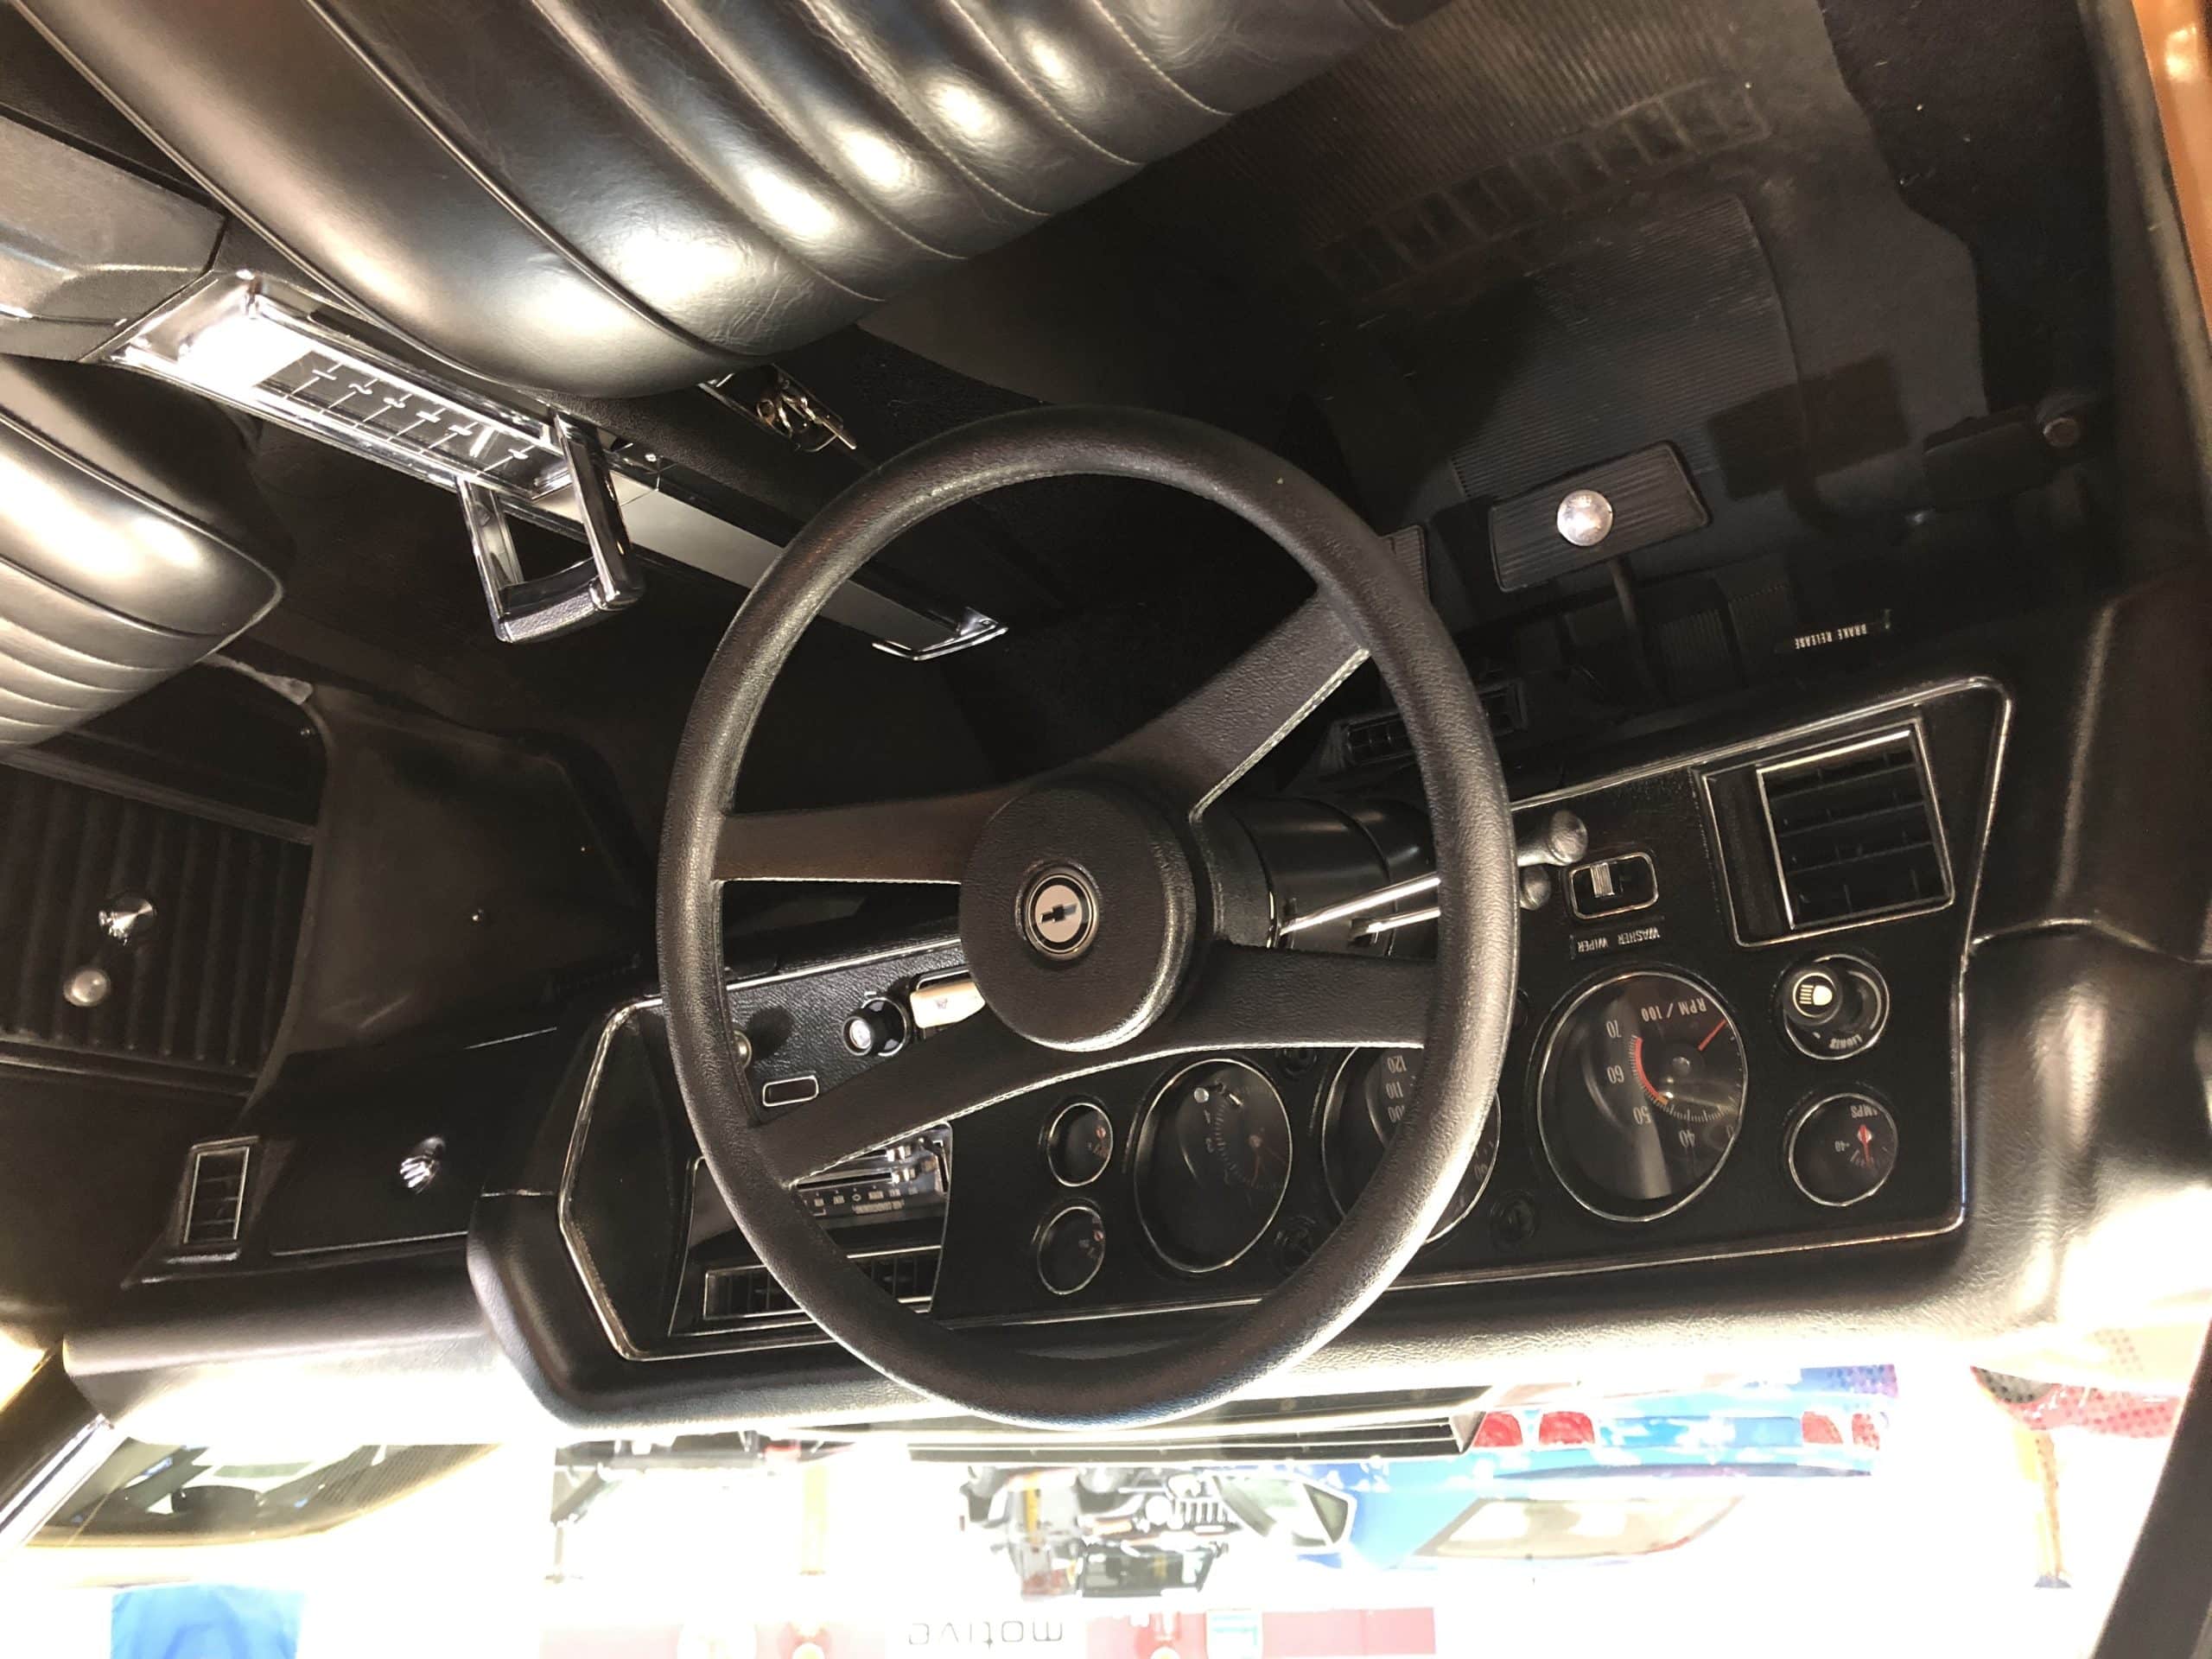 Let’s See.  Rally Gauges, Factory Tach, Center Console, Bucket Seats, Basket Handle Floor Shifter, And Yes, An 8-Track Player With A Zeppelin Tape.